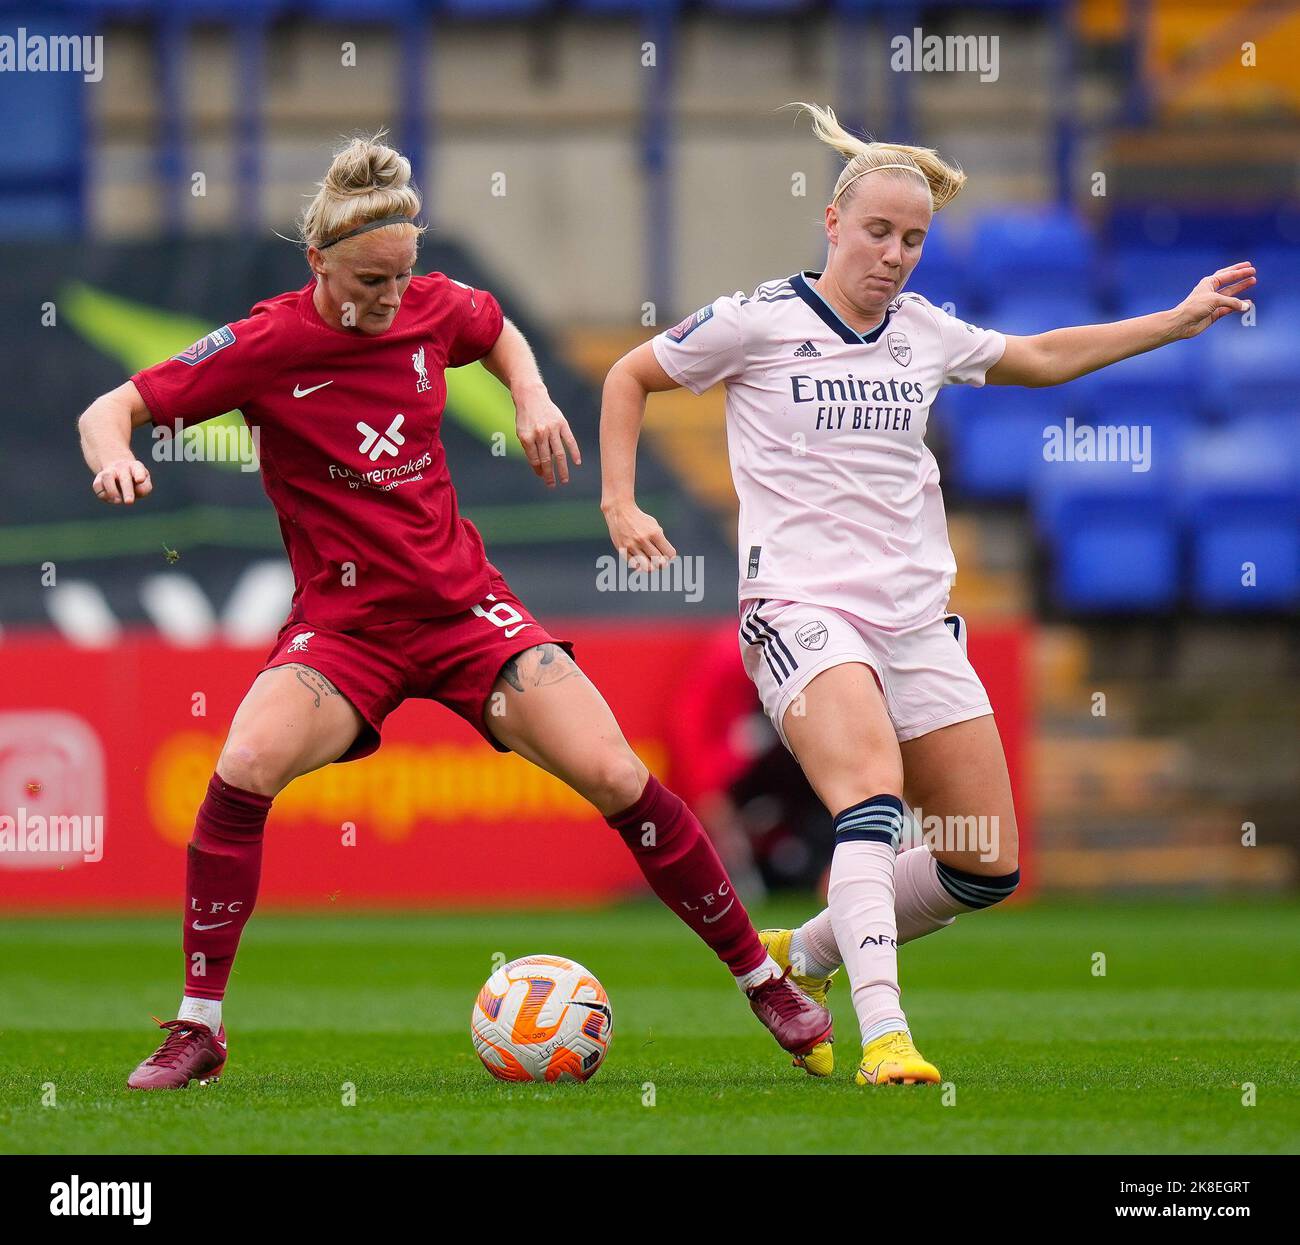 Liverpool, UK. 23rd Oct, 2022. Liverpool, England, October 23rd 2022: Jasmine Matthews (6 Liverpool) and Beth Mead (9 Arsenal) battle for the ball during the Barclays Womens Super League football match between Liverpool and Arsenal at Prenton Park in Liverpool, England. (James Whitehead/SPP) Credit: SPP Sport Press Photo. /Alamy Live News Stock Photo